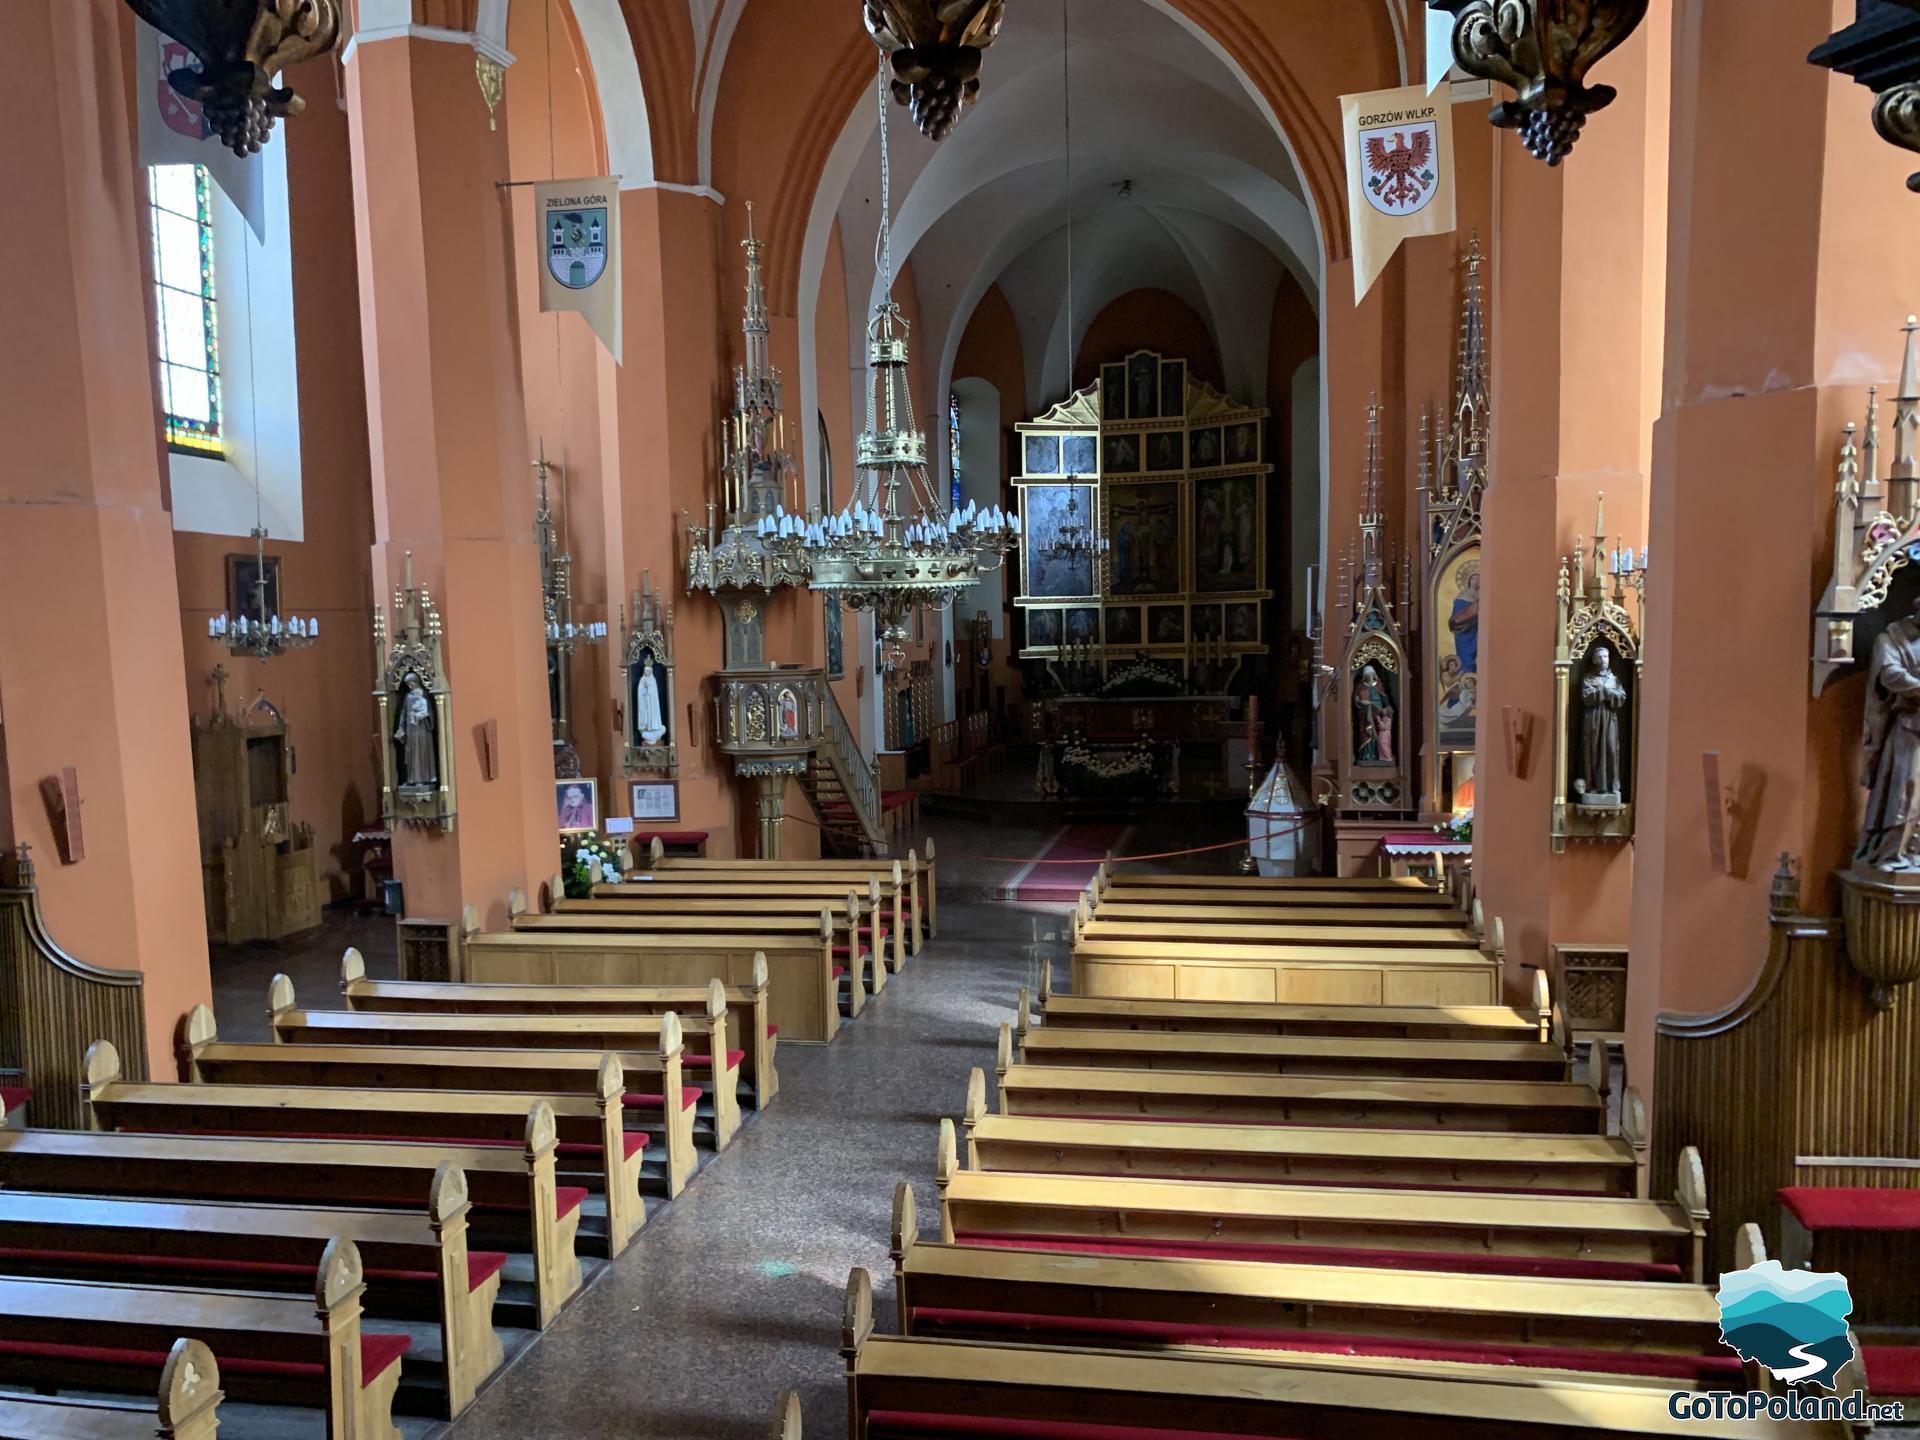 rows of pews in the church, the main altar in the background